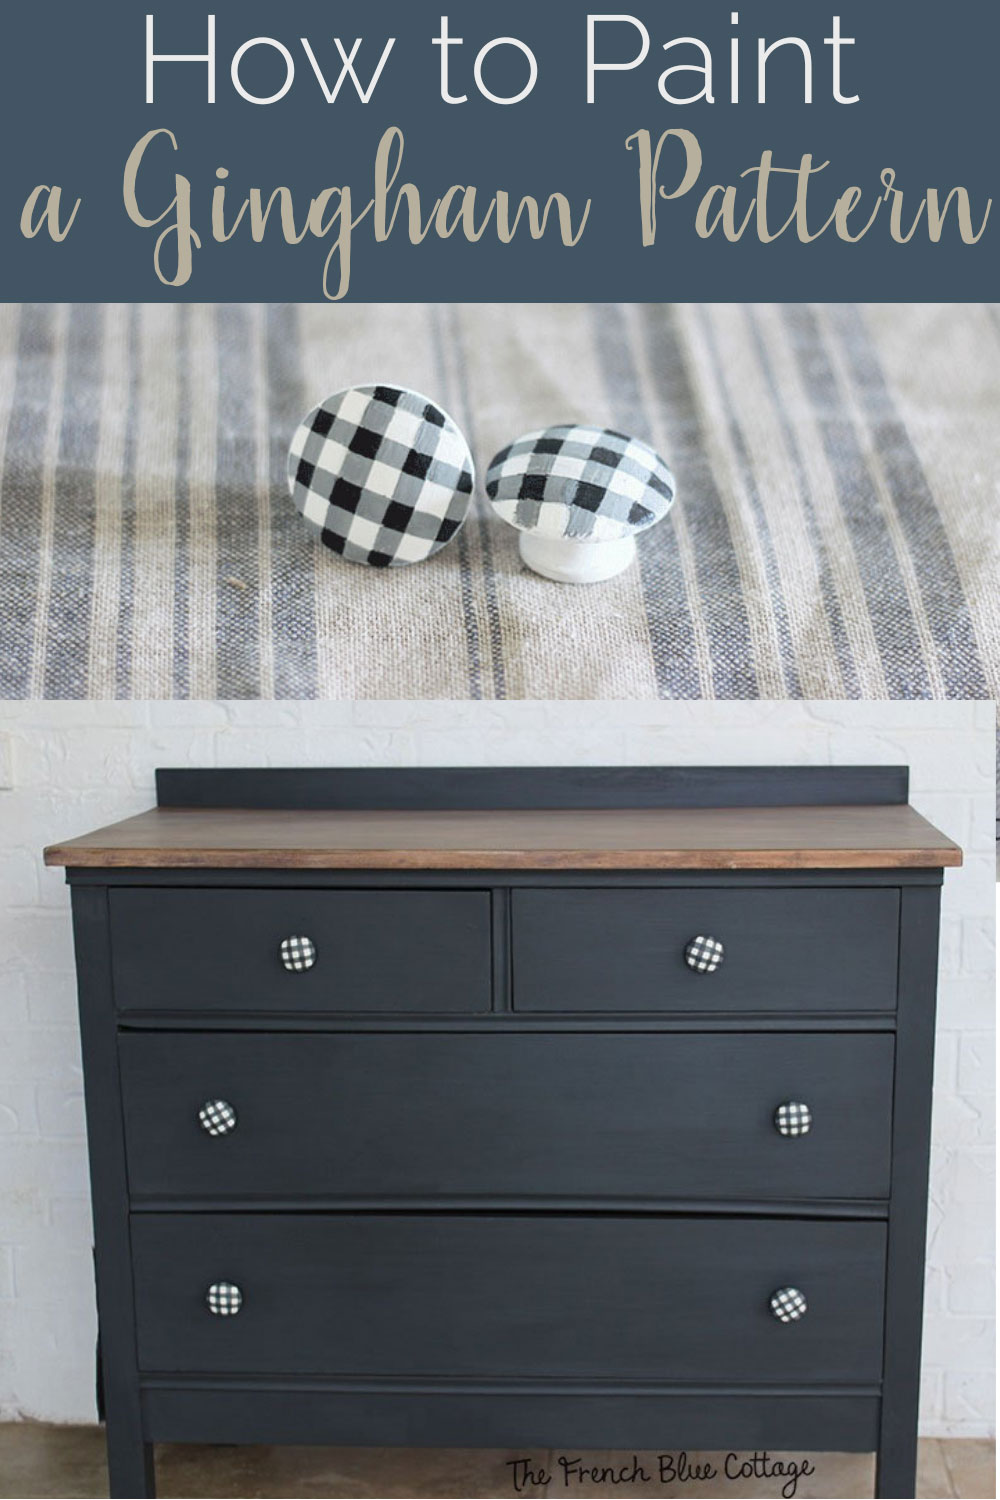 gingham painted pattern on dresser knobs